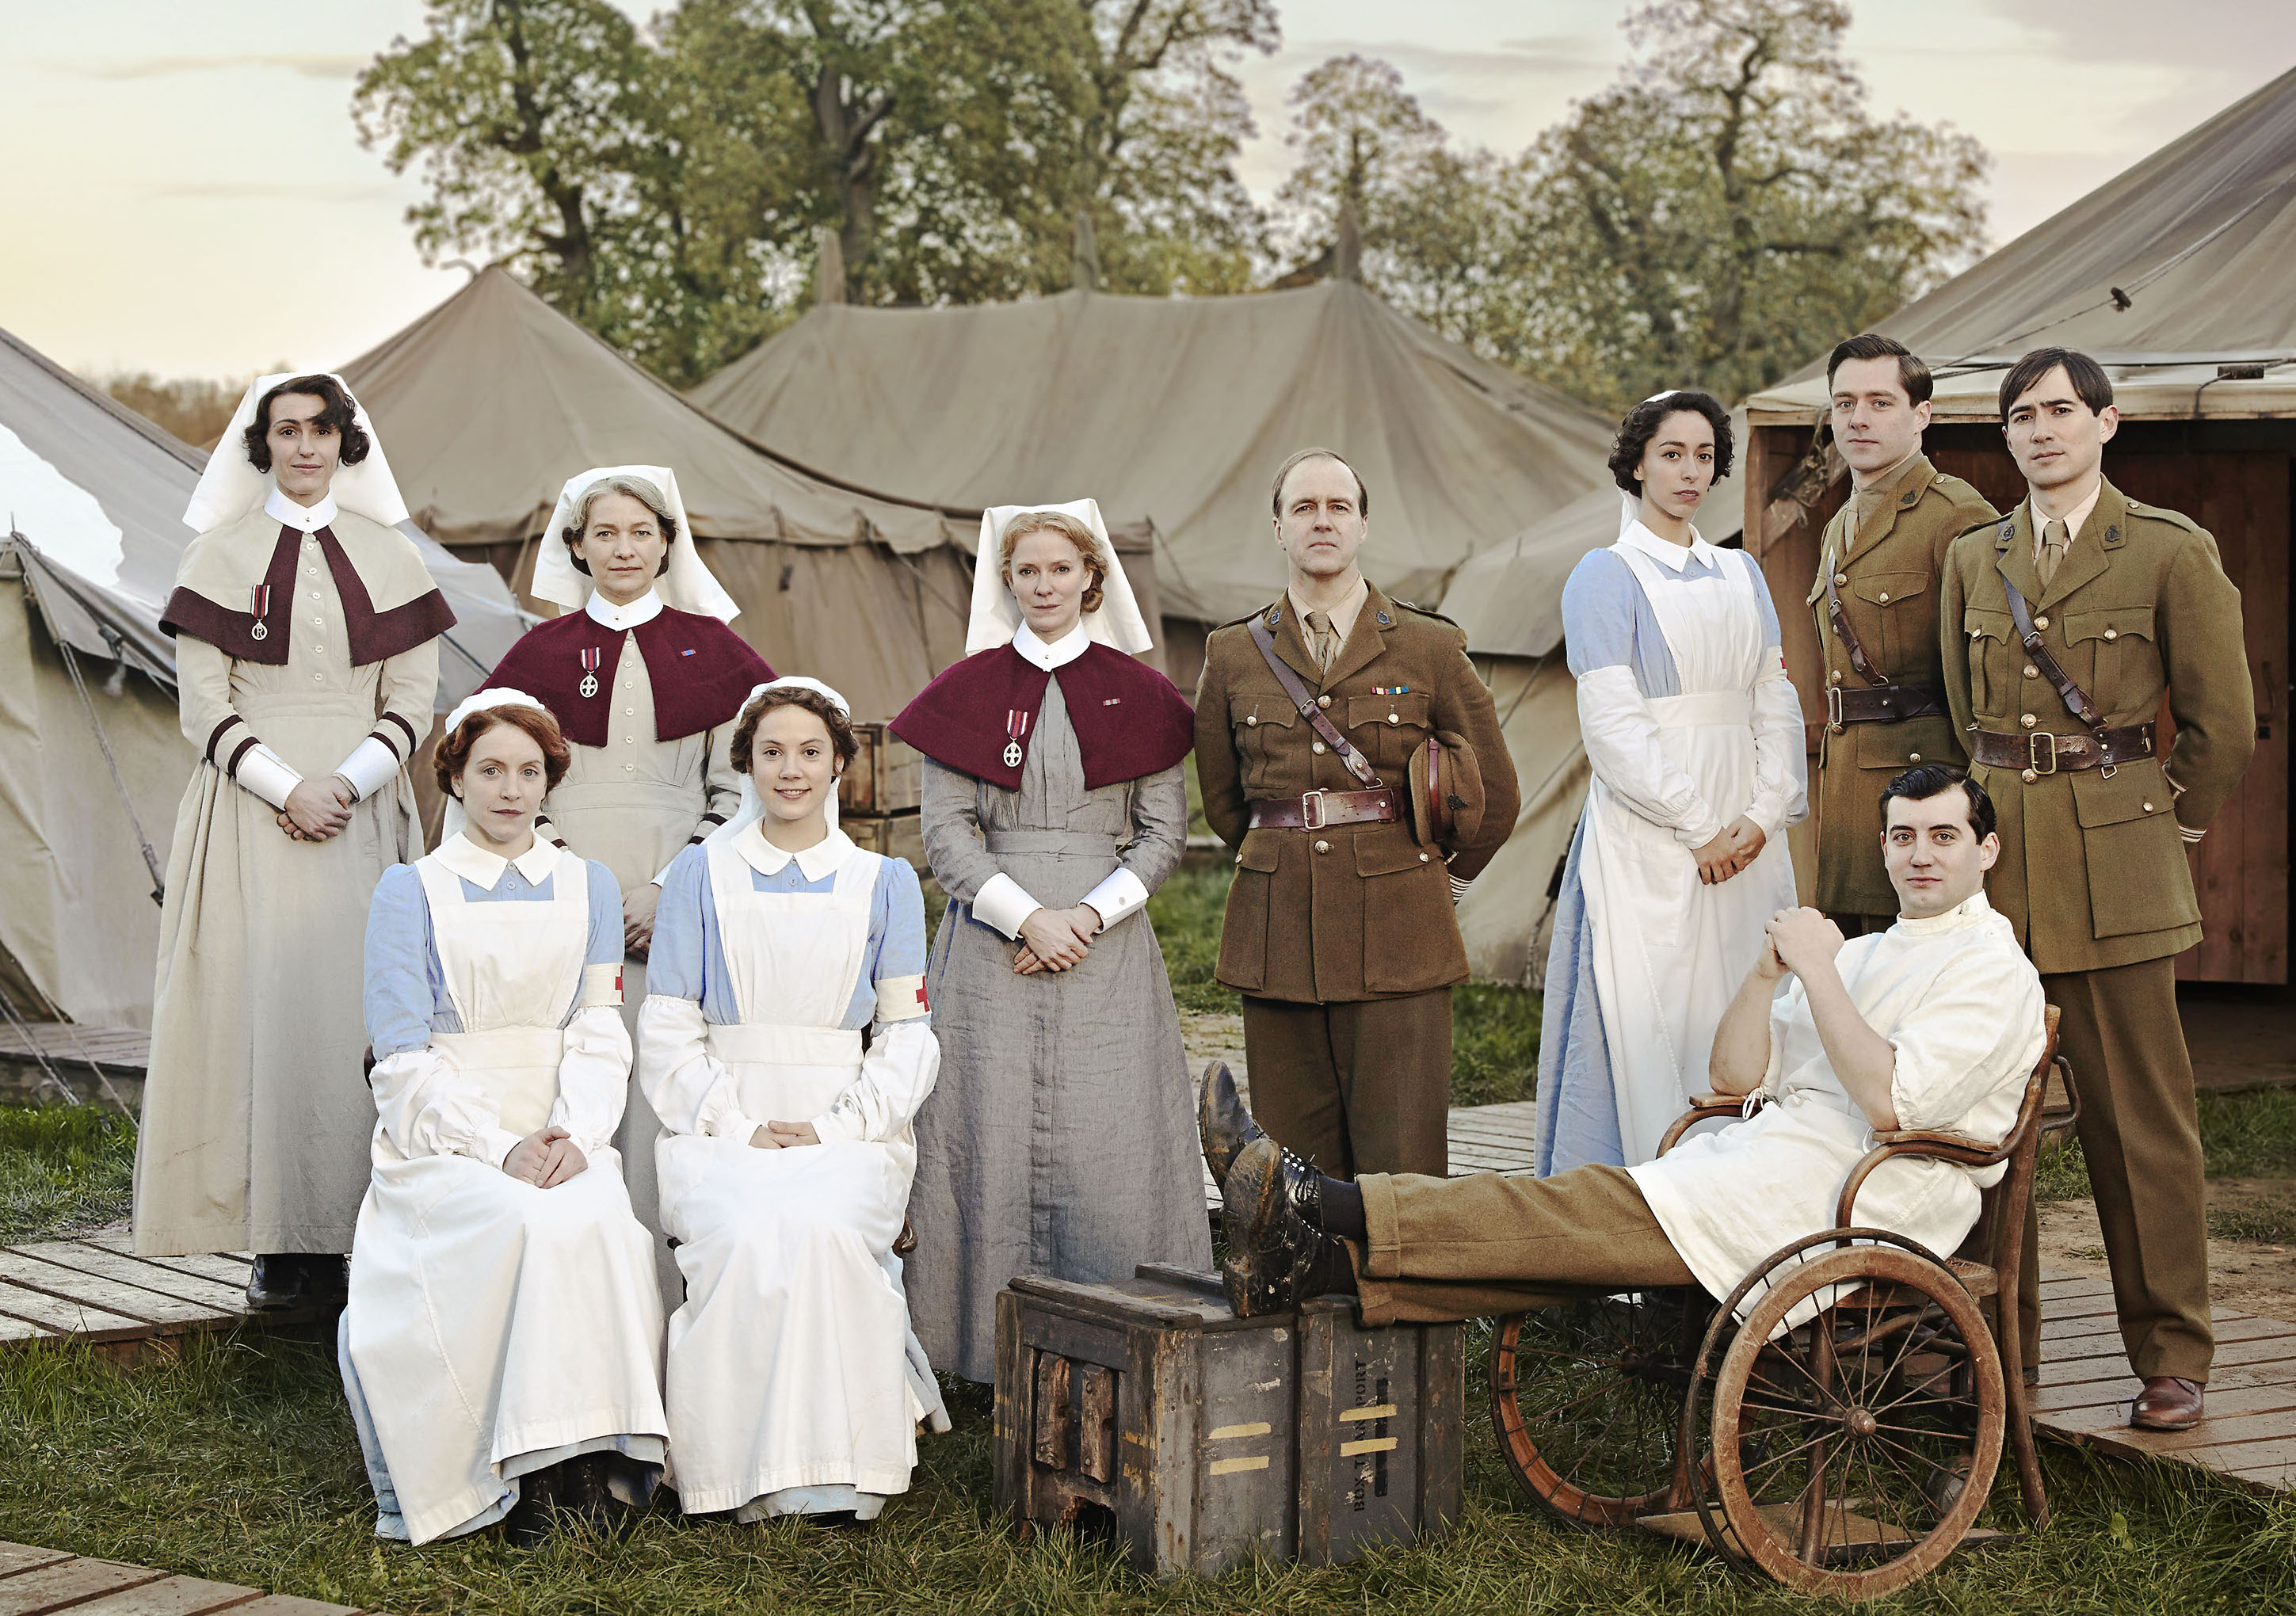 The cast of "The Crimson Field" (Photo: Courtesy of BBC/Todd Anthony)